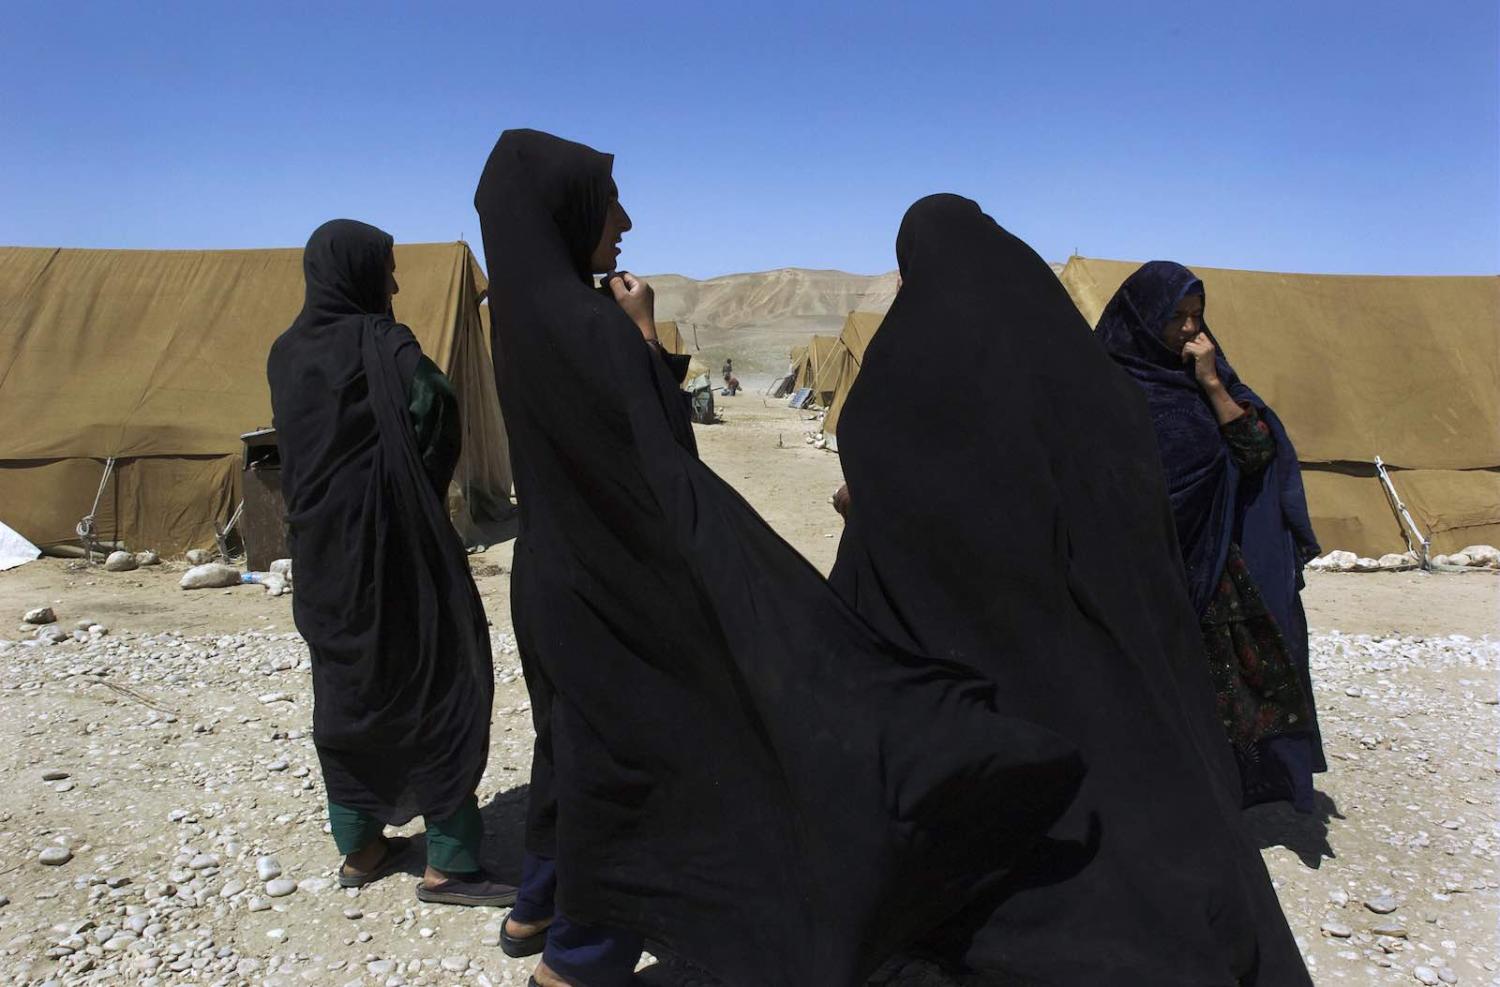 A group of Afghan women, former refugees newly returned from Iran, gathers at a UN returnee camp in western Afghanistan, 2009 (Photo: UN Photo/Flickr)